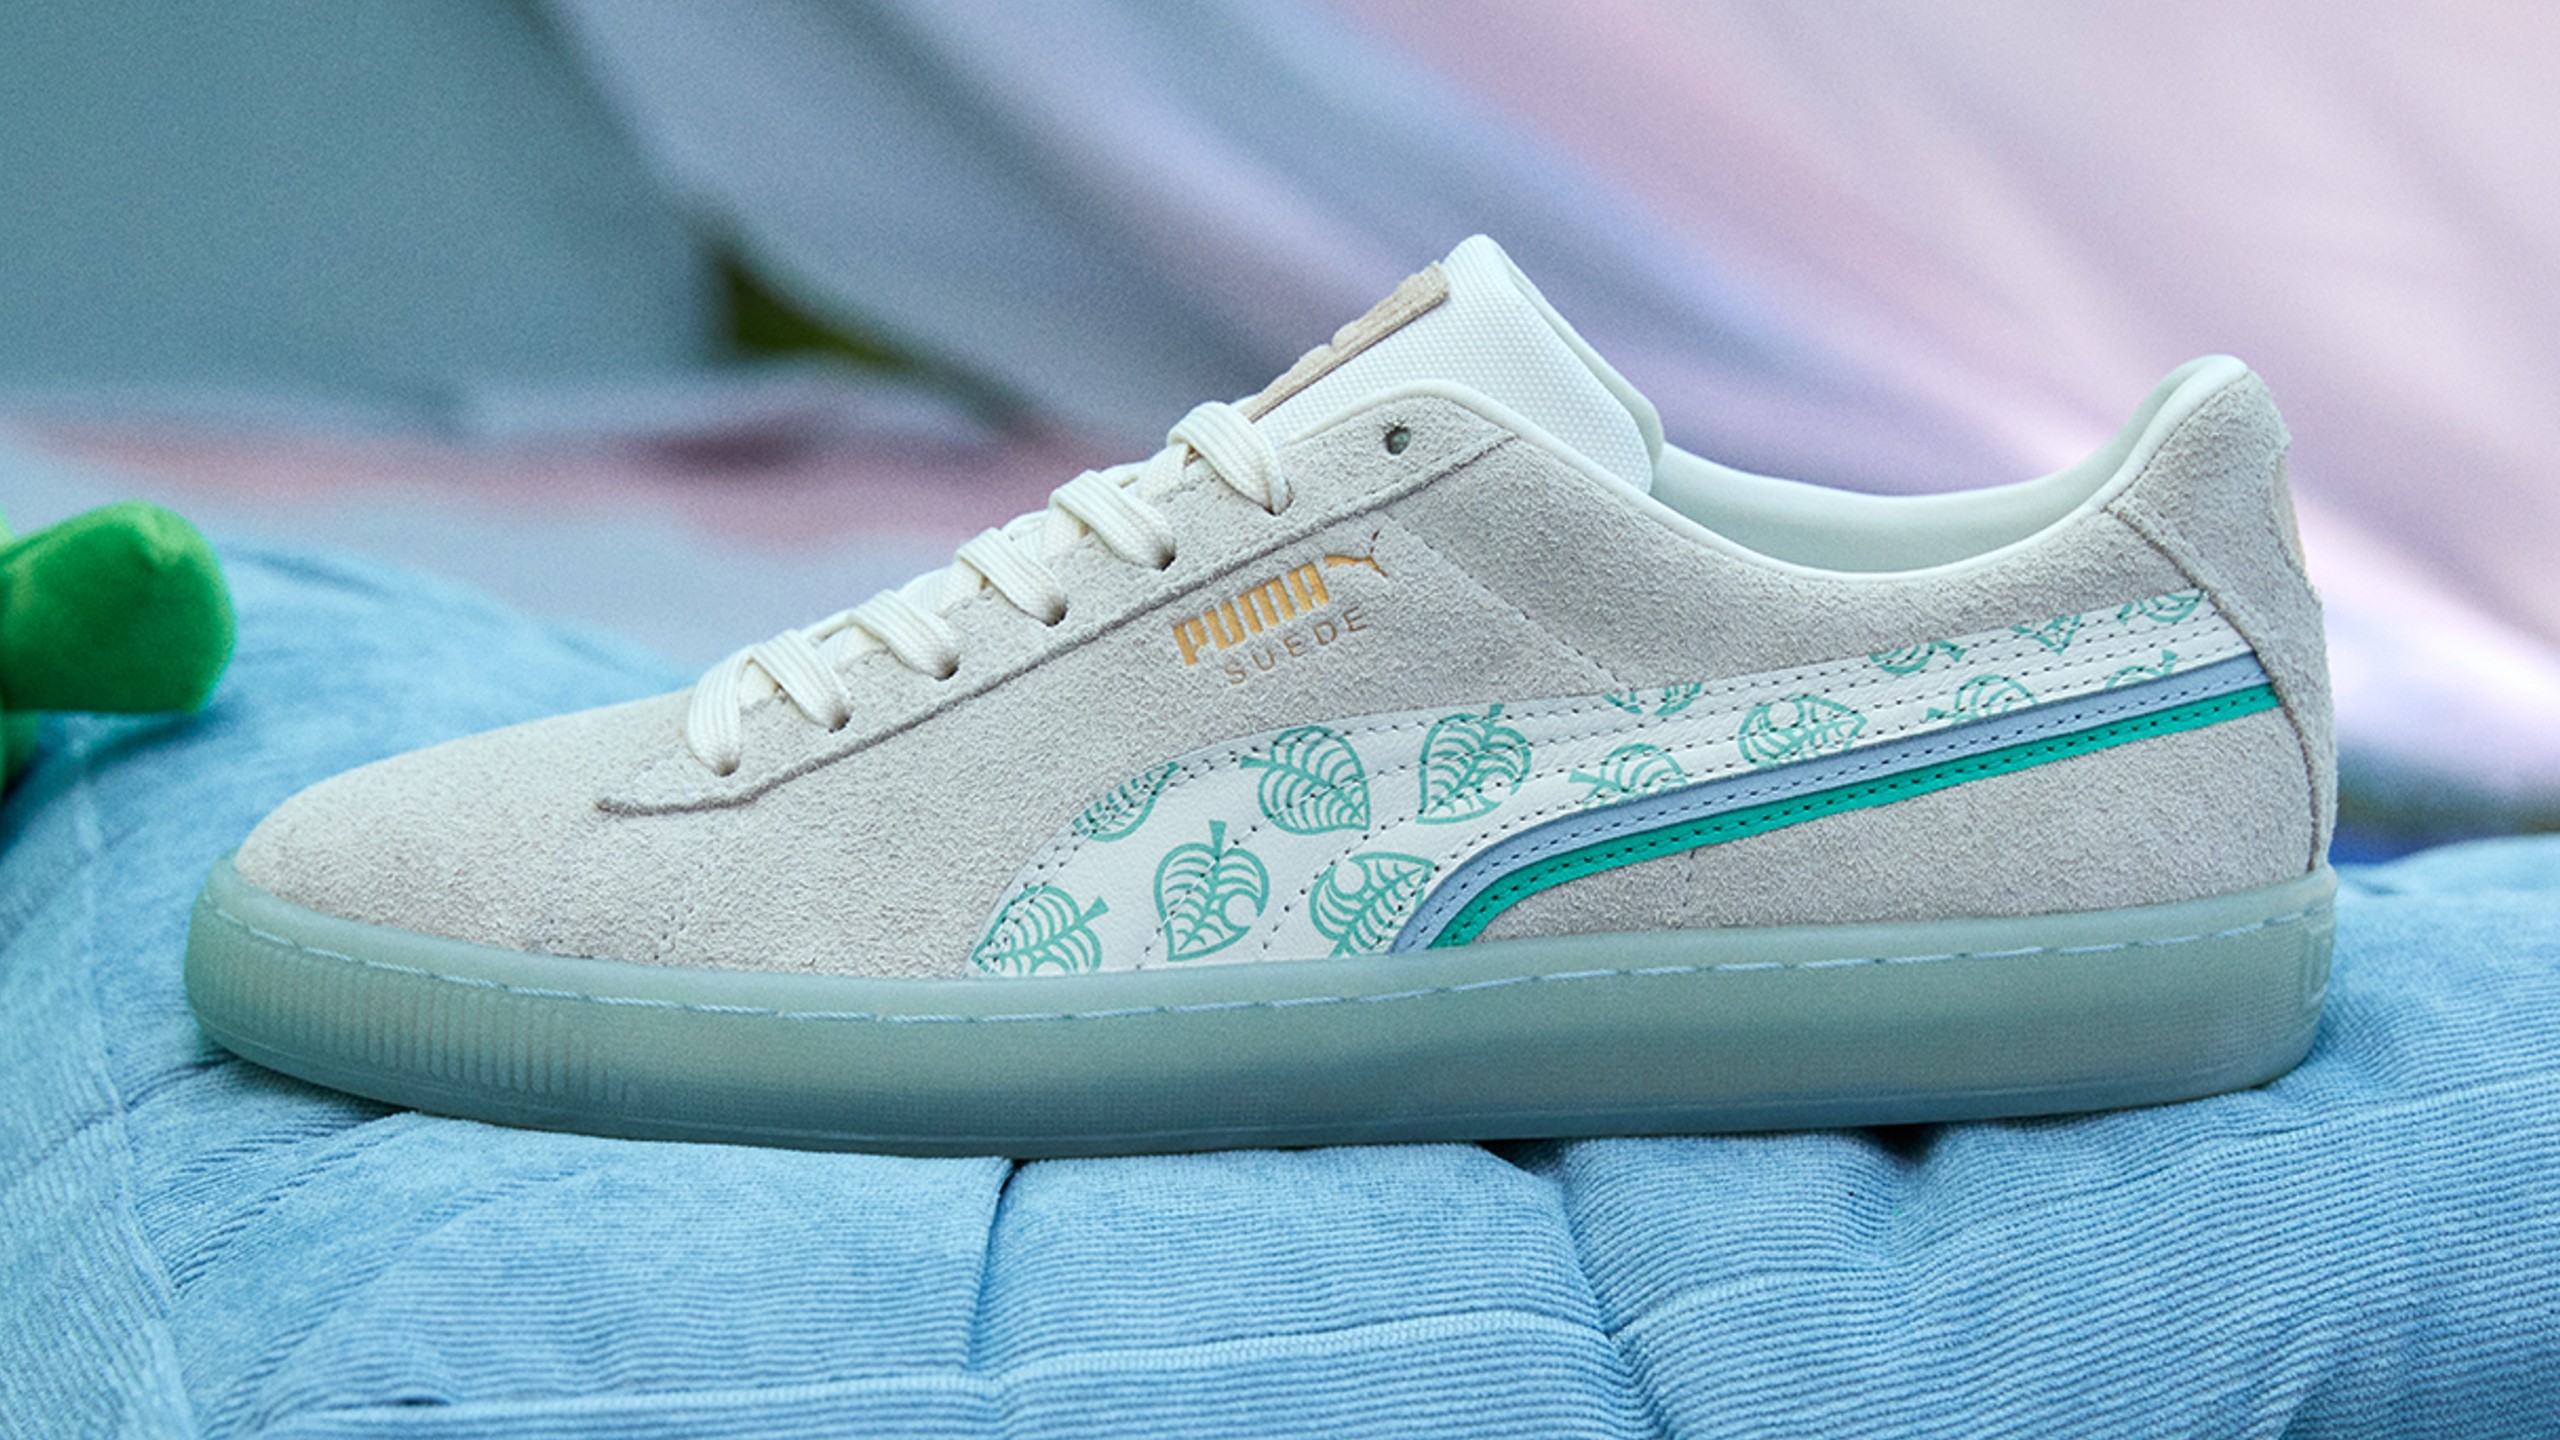 Puma Reveals Release Date for Their Animal Crossing Collaboration